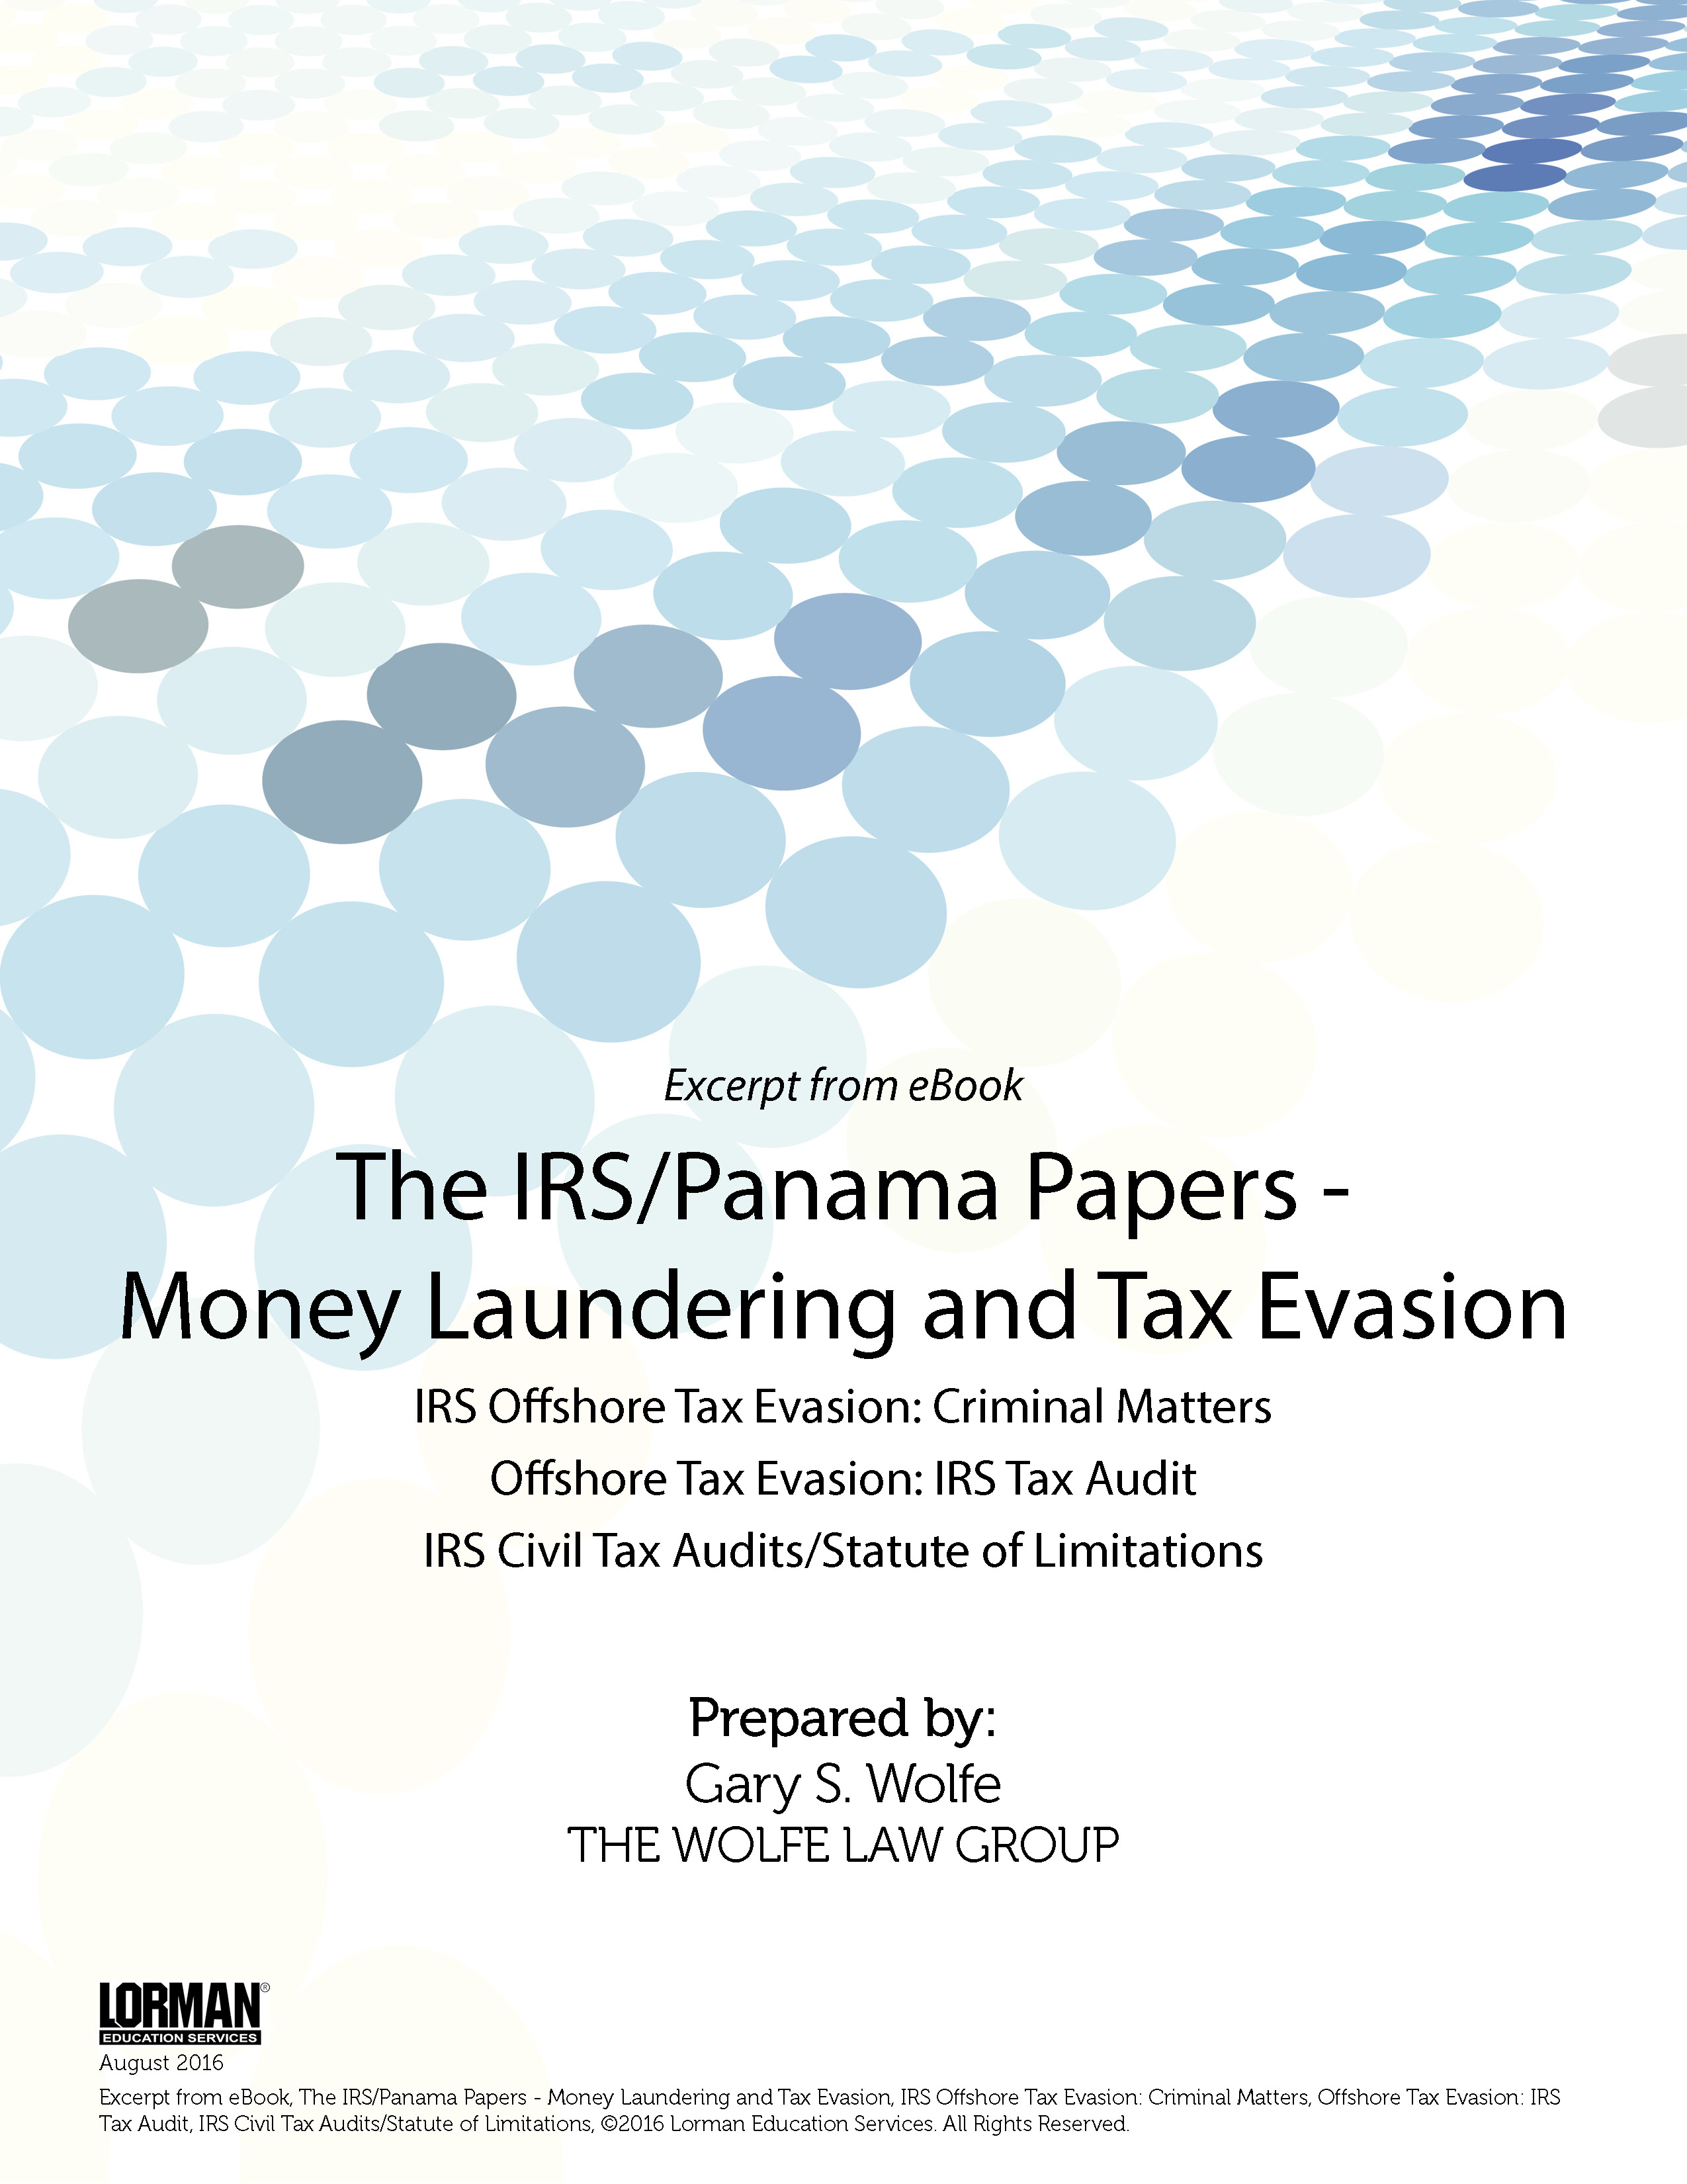 The IRS-Panama Papers - Money Laundering and IRS Offshore Tax Evasion